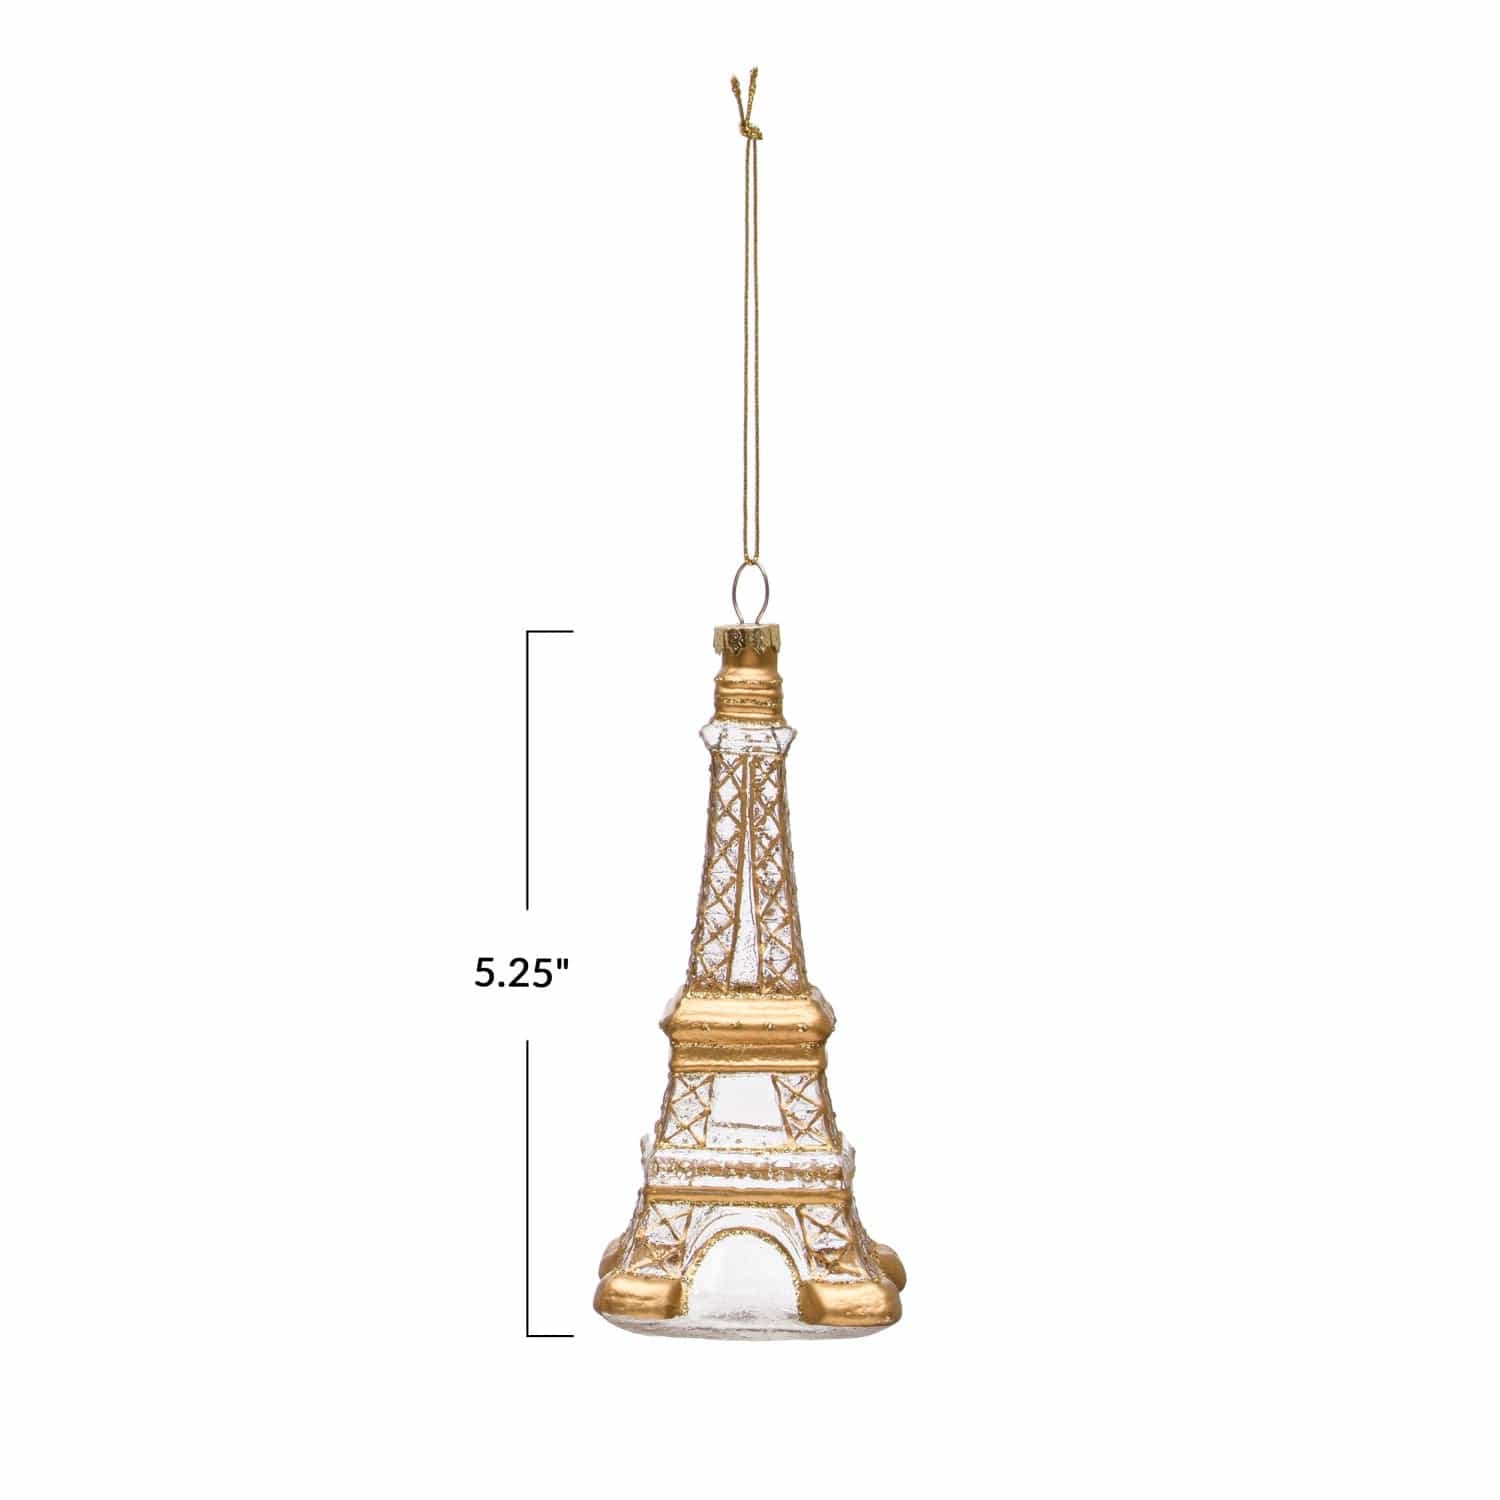 Creative Co-Op Creative Co-op Hand-Painted Glass Eiffel Tower Ornament with Glitter - Little Miss Muffin Children & Home